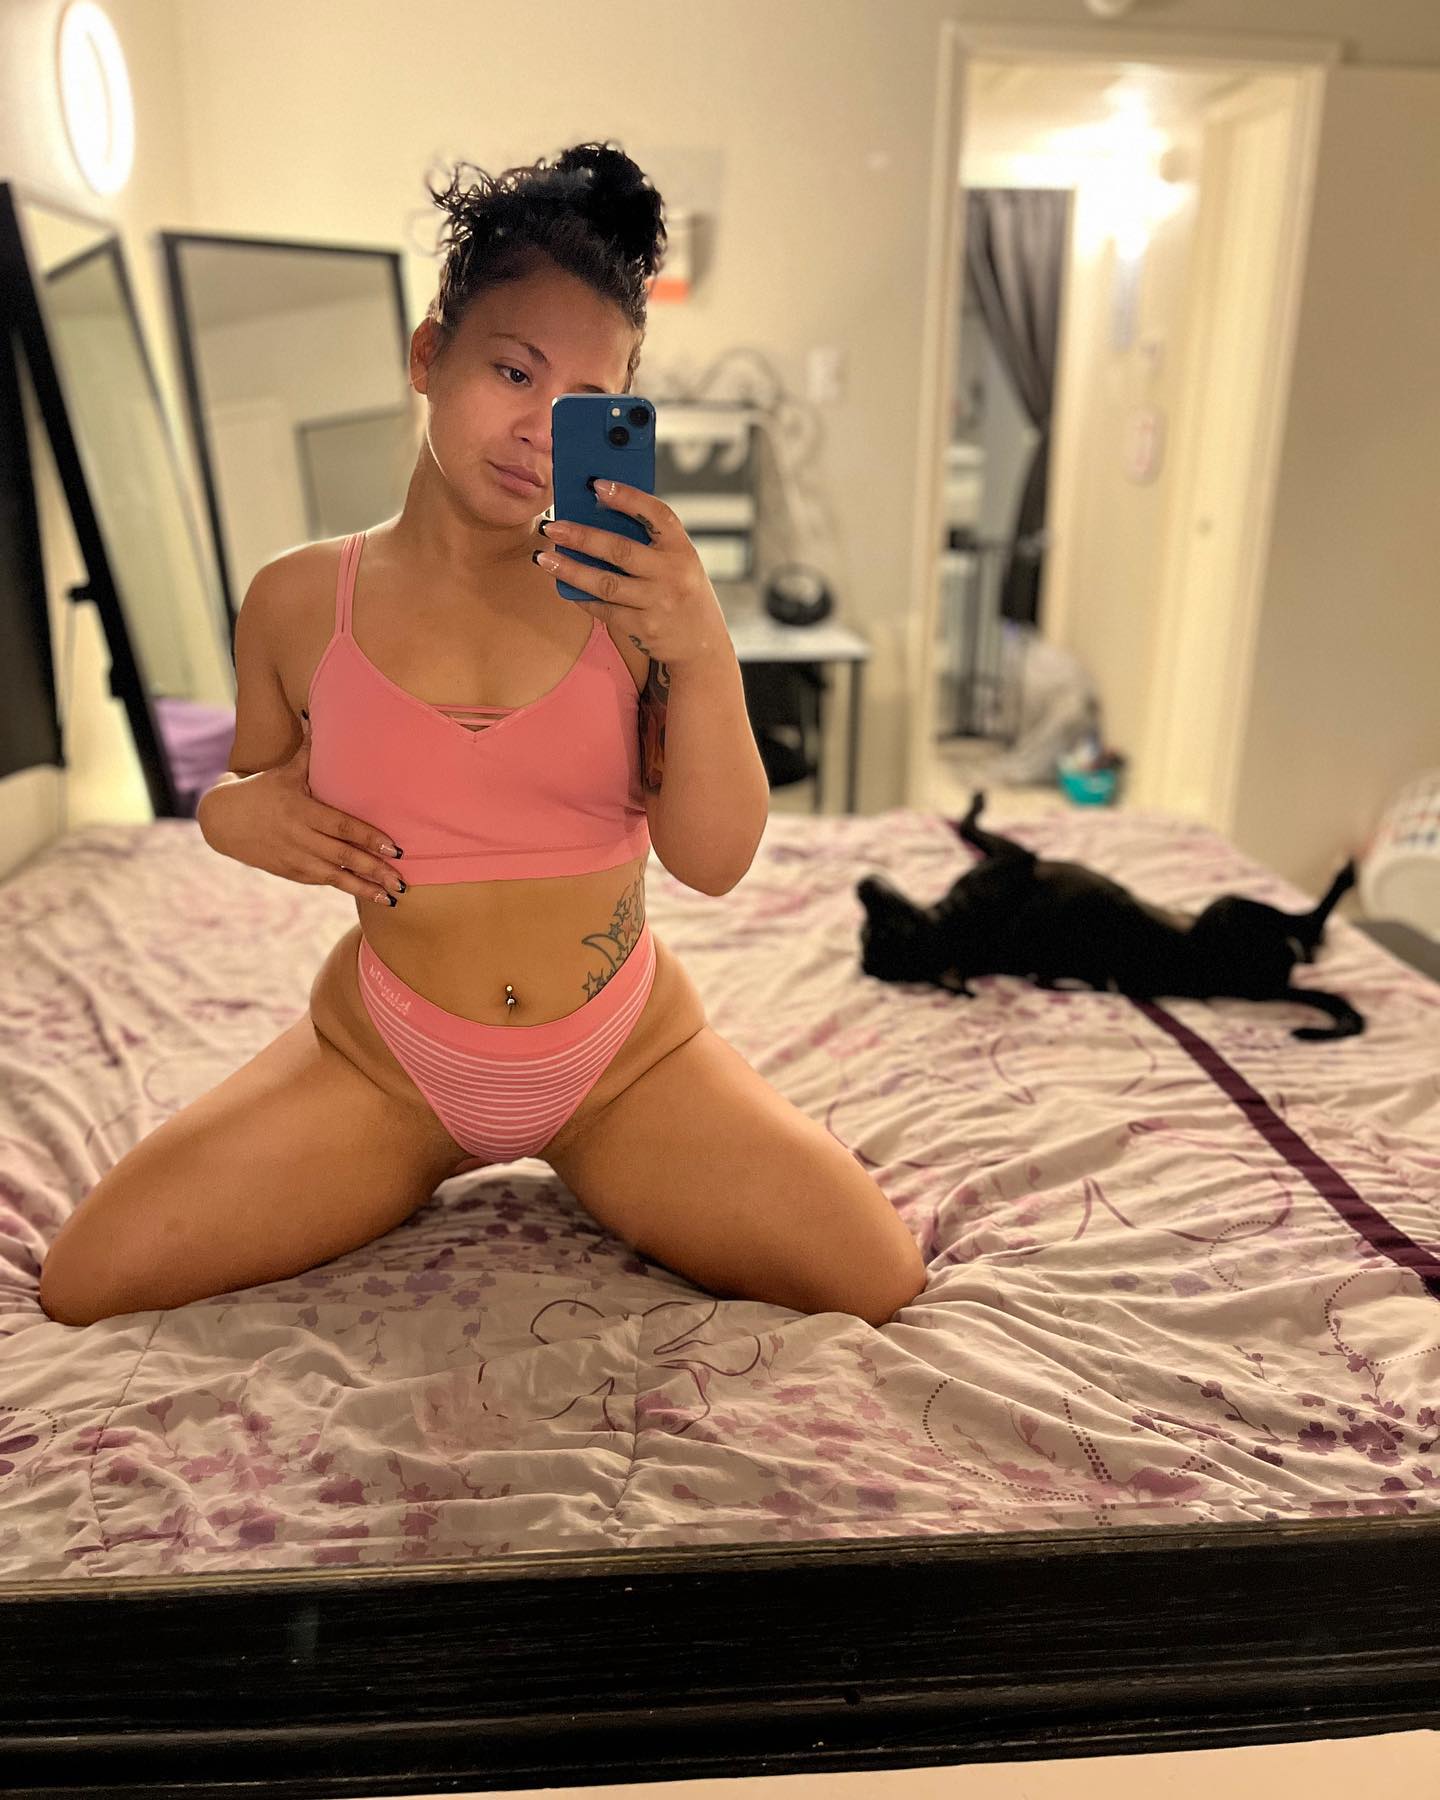 None of this is real 💖✨ well this body is 🤭